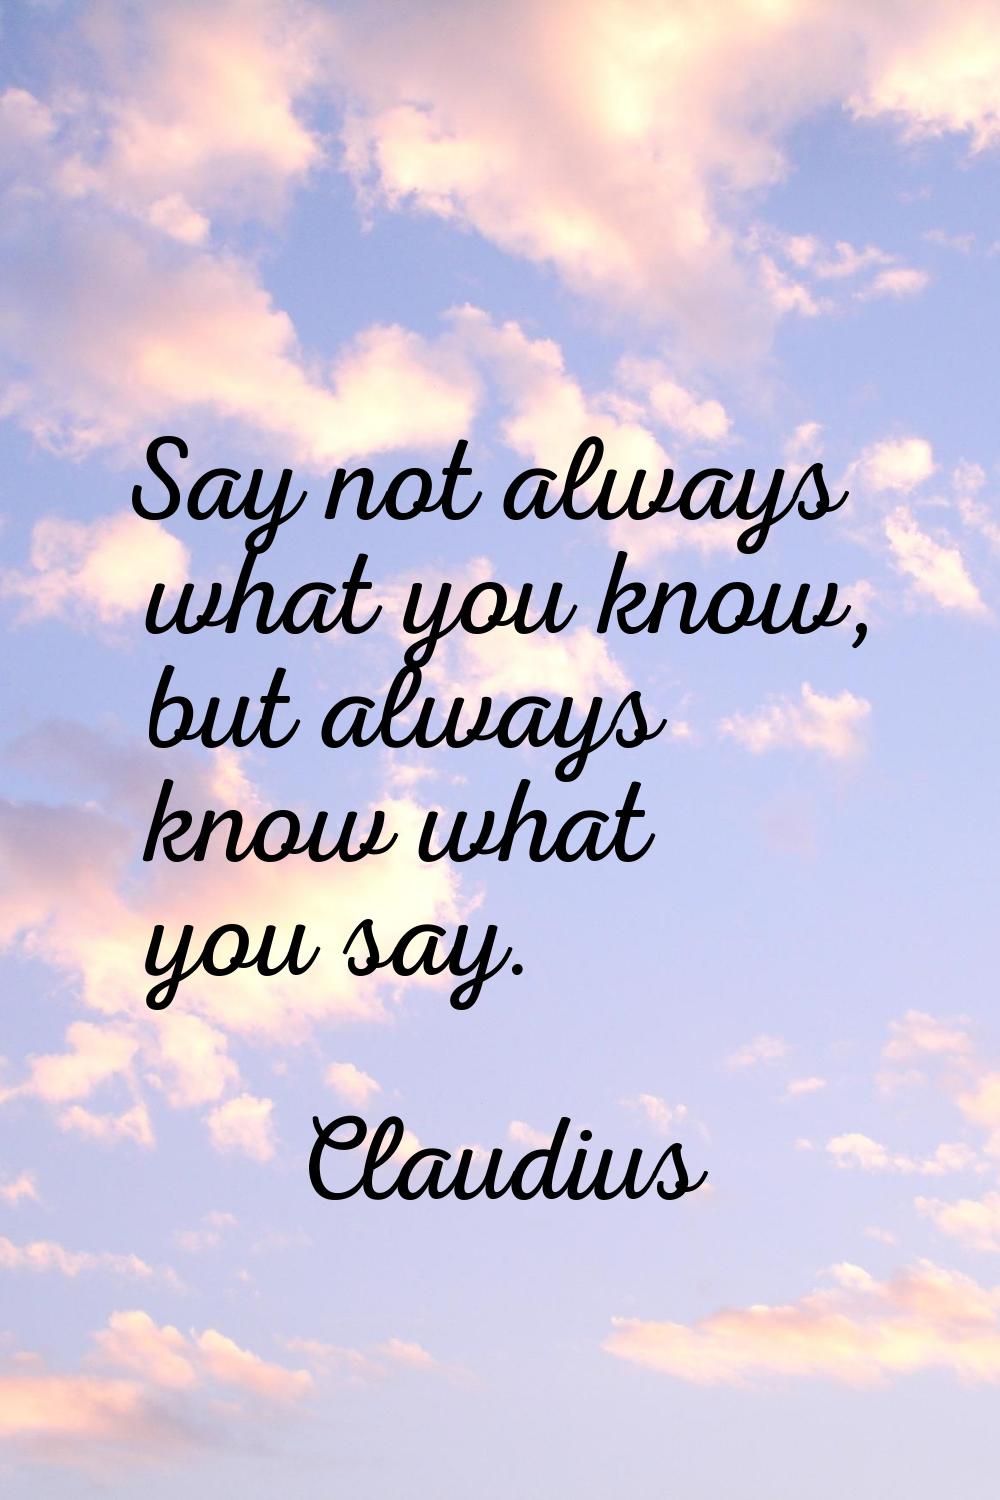 Say not always what you know, but always know what you say.